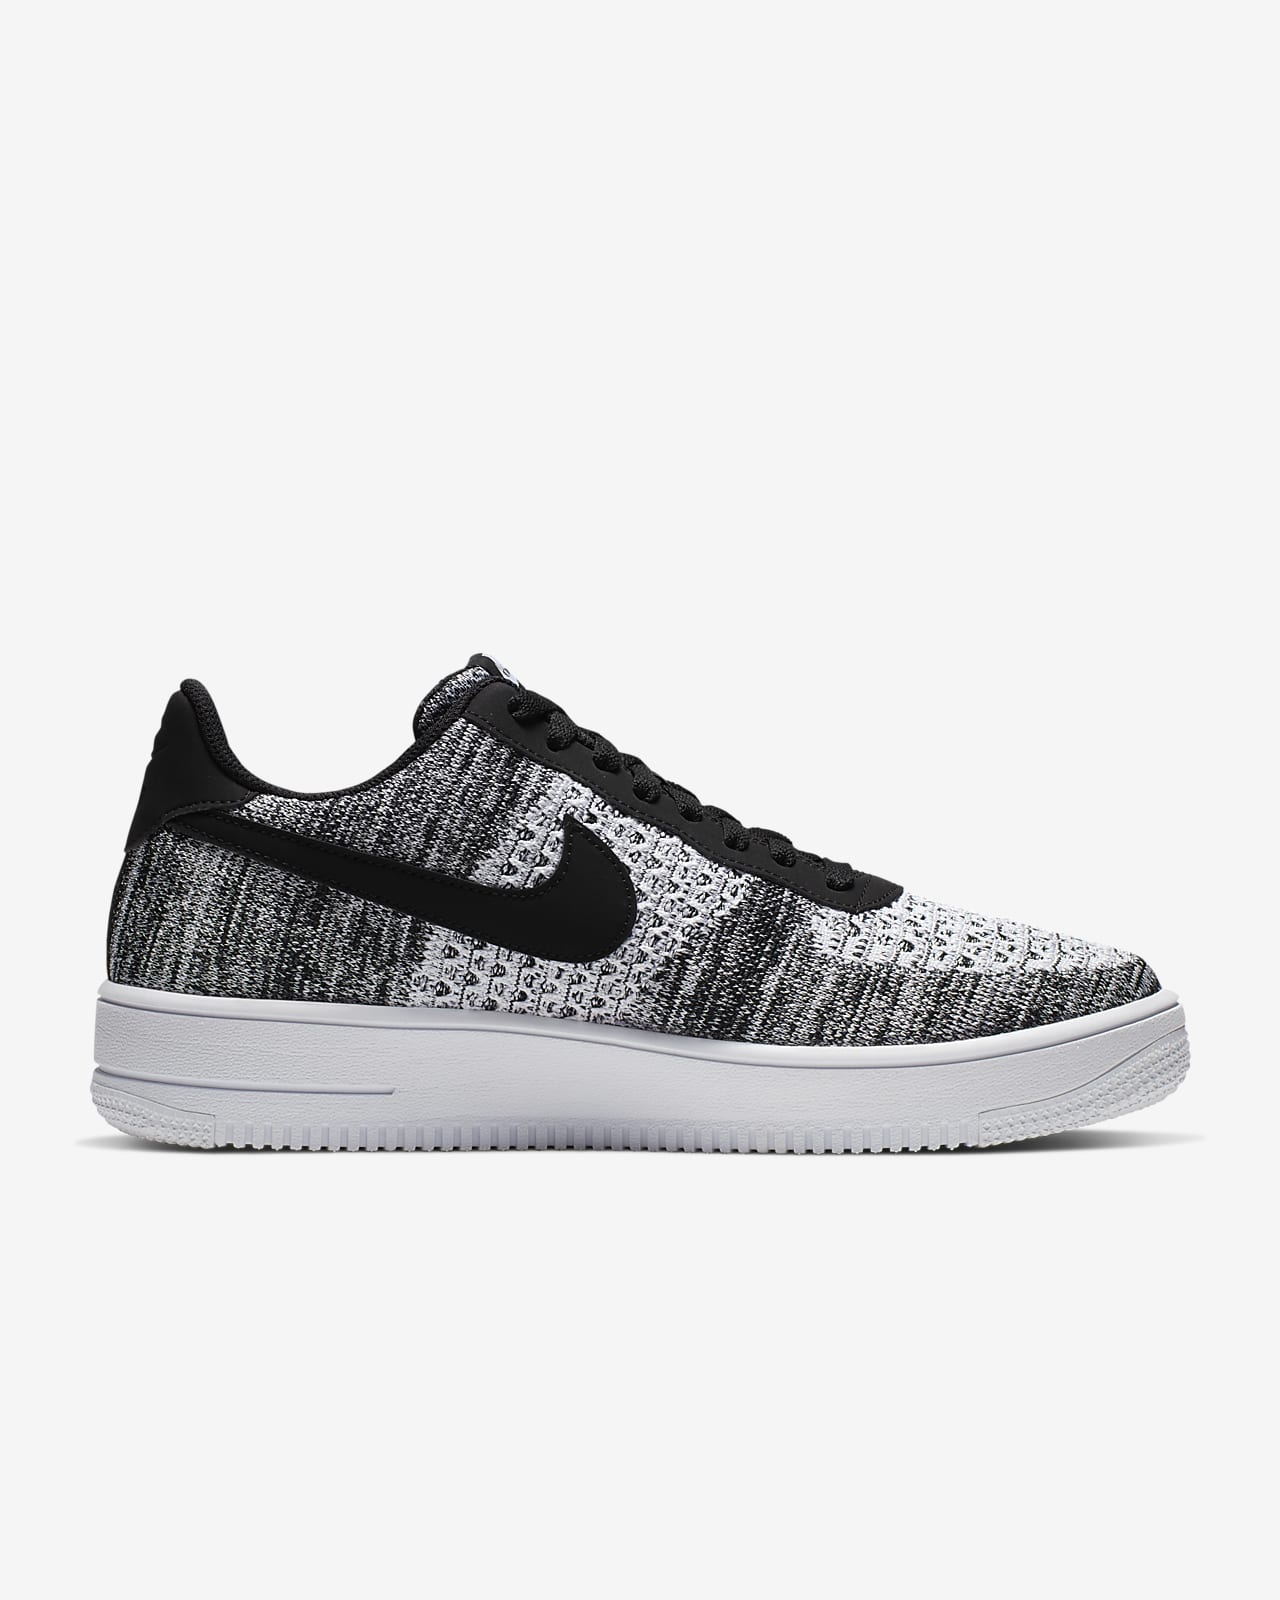 Nike Air Force 1 Flyknit 2.0 Shoes